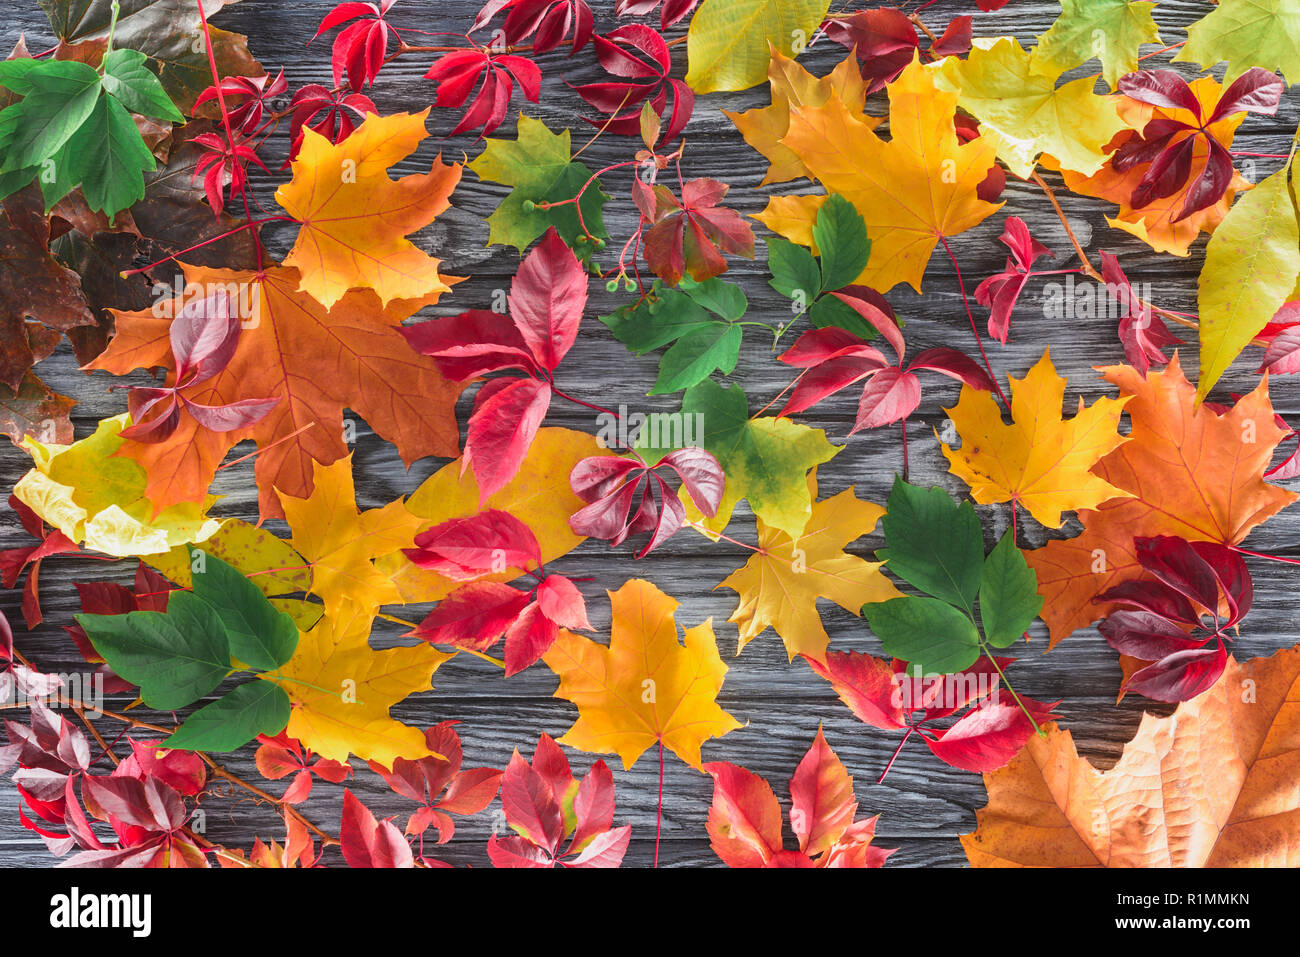 top view of scattered colored autumnal maple leaves on wooden surface Stock Photo